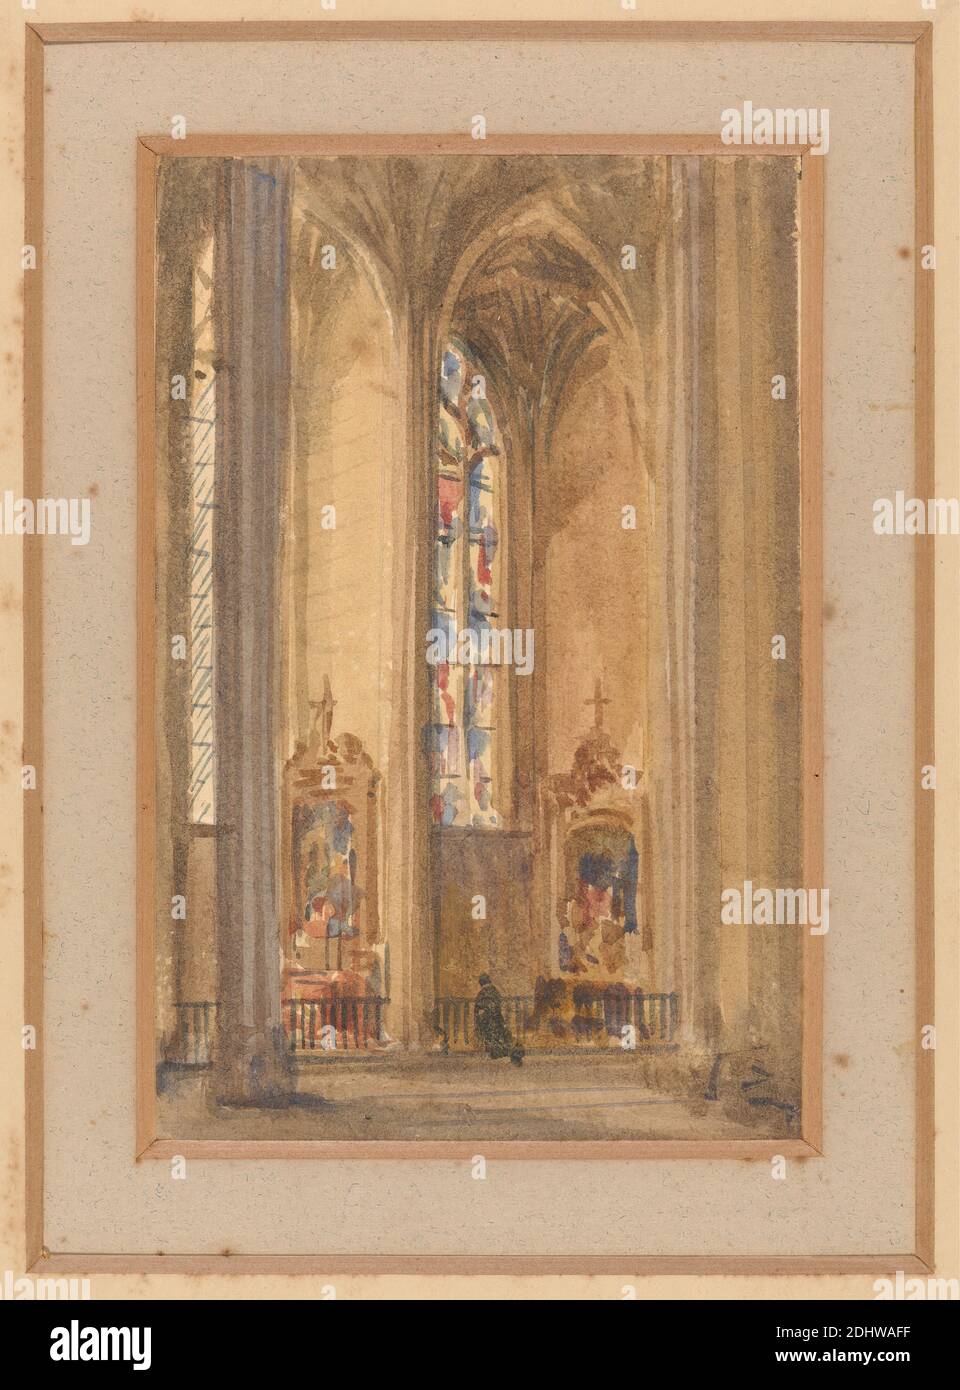 Interior of a Gothic Church, Augustus Welby Northmore Pugin, 1812–1852, British, Augustus Charles Pugin, 1762–1832, French, undated, Watercolor on moderately thick, moderately textured, cream wove paper, Sheet: 5 1/8 x 3 3/8 inches (13 x 8.6 cm), architectural subject, chapels, church, columns (architectural elements), Gothic (Medieval), interior, stained glass, windows, woman Stock Photo